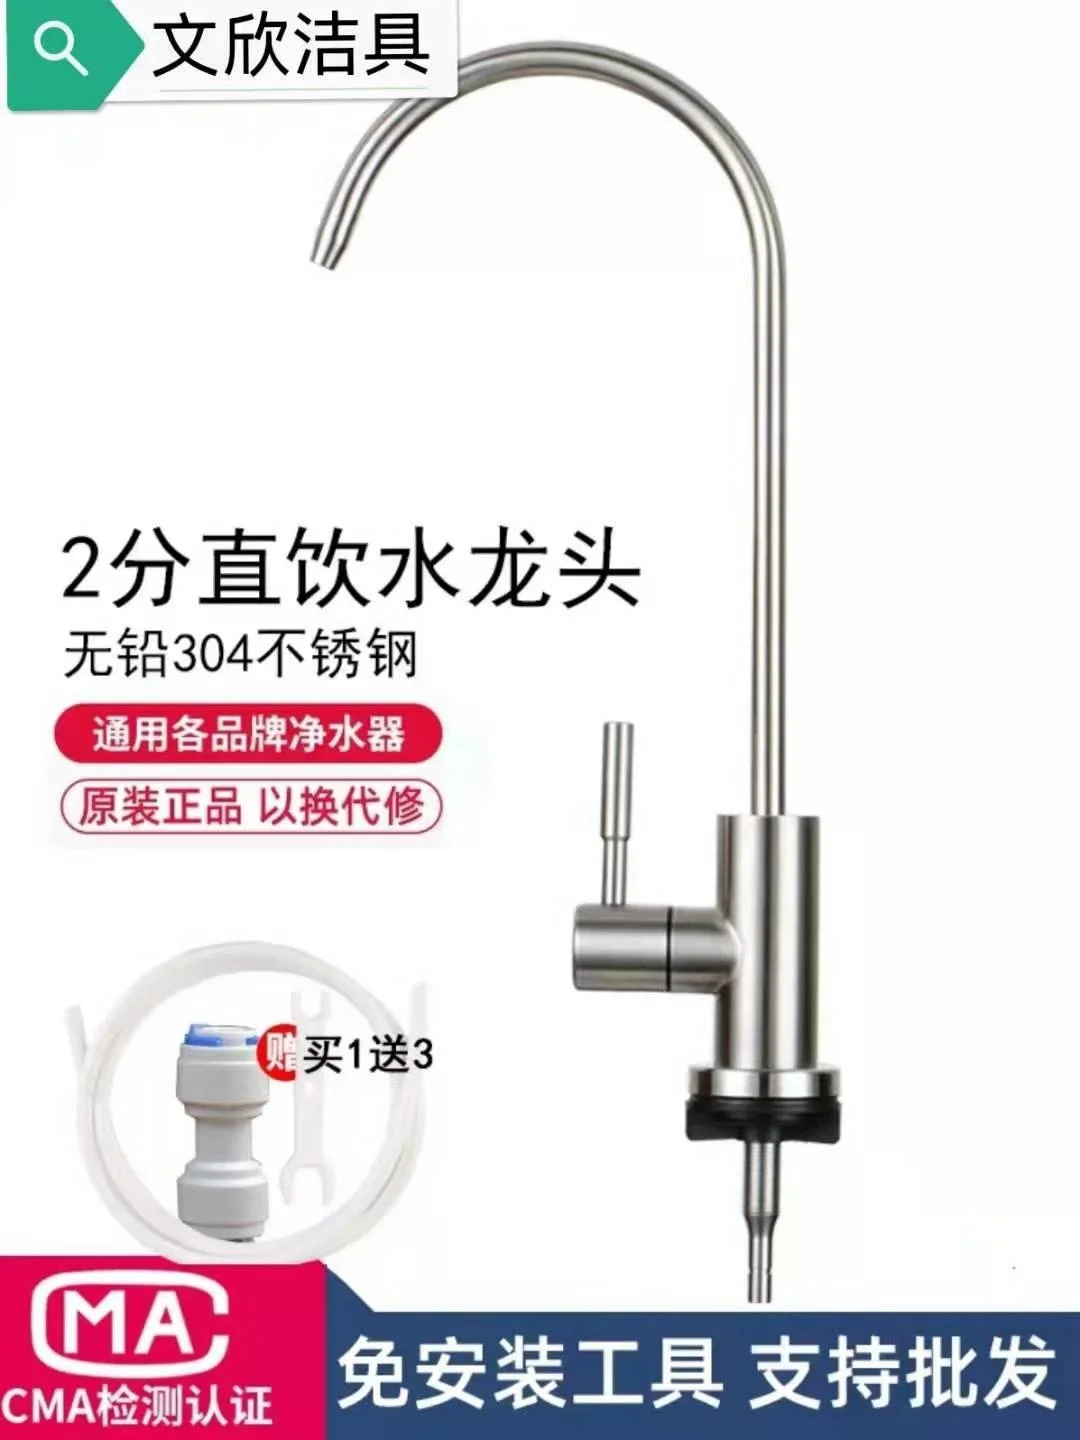 

Water purifier faucet fine nozzle household purified water machine clean faucet 2 points direct drinking water 304 stainless